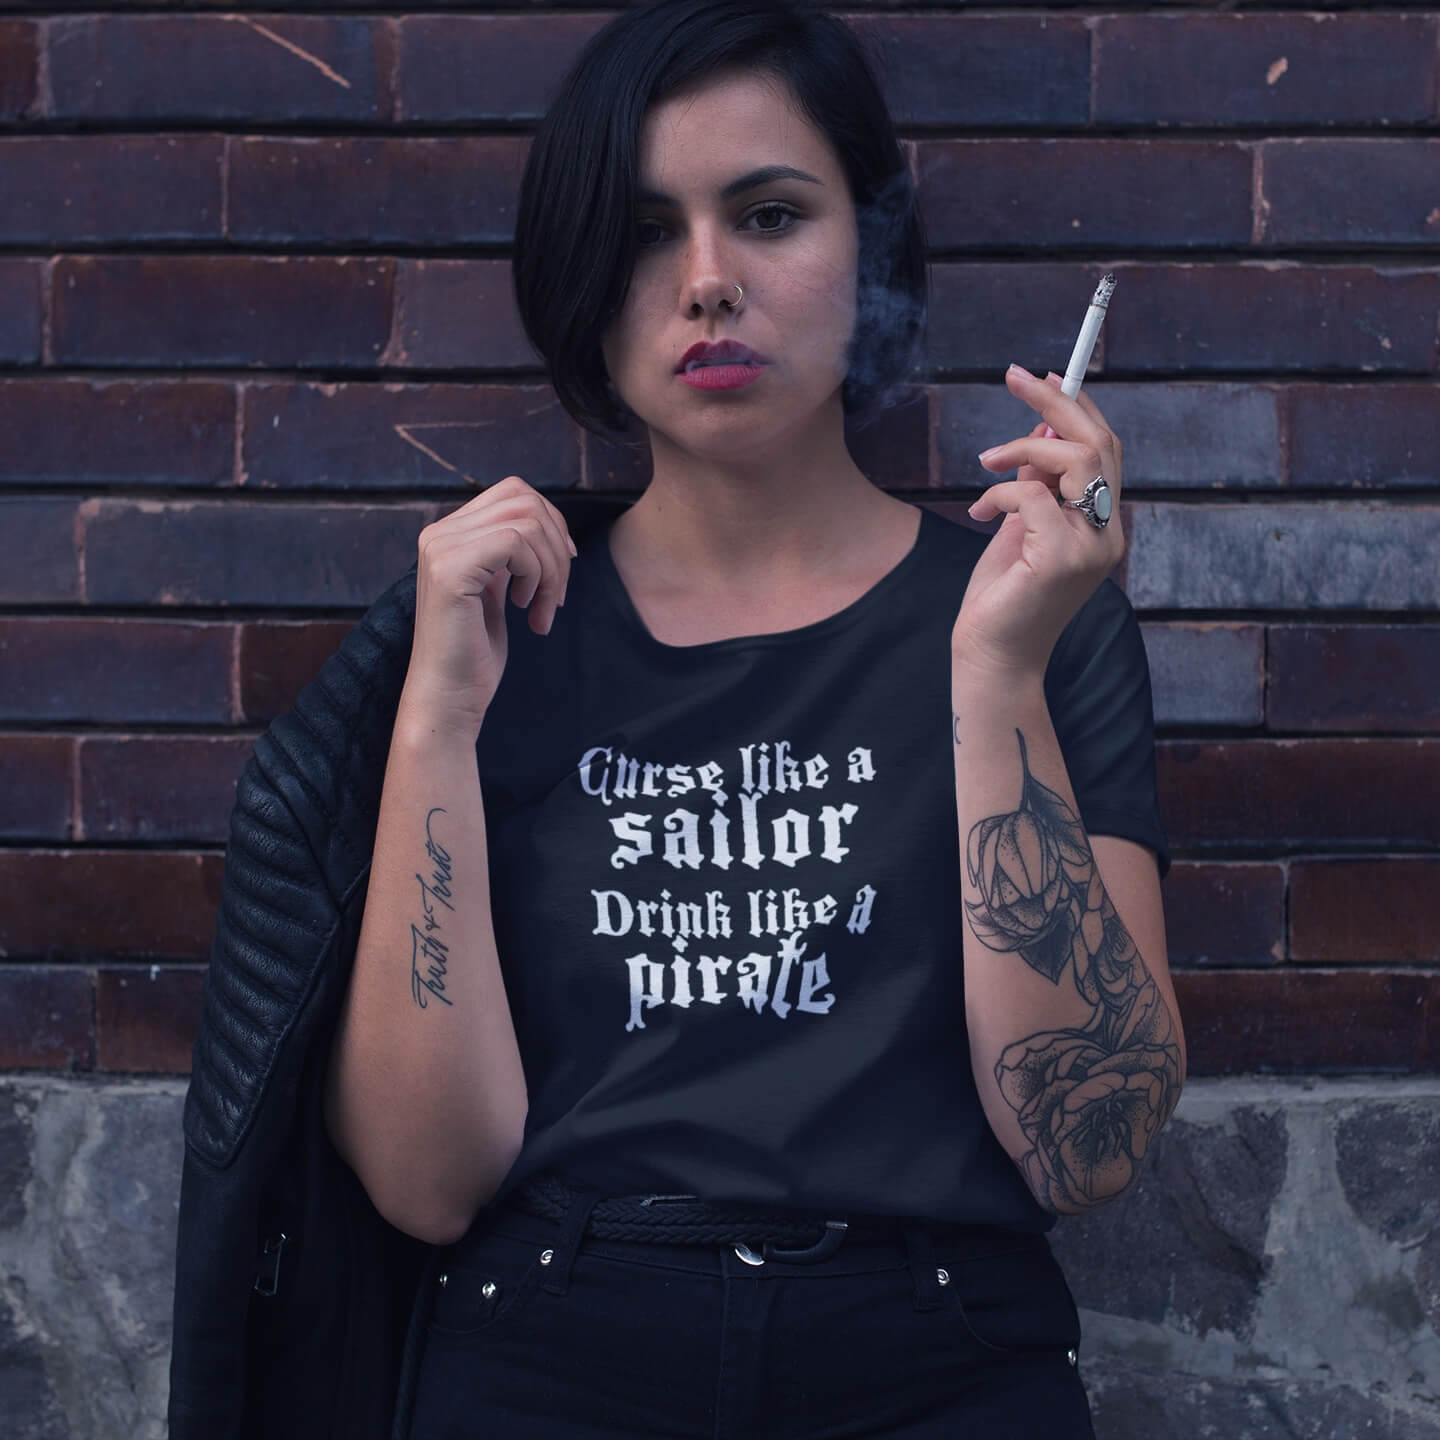 Dark haired woman smoking wearing curse like a sailor drink like a pirate tee scoop neck